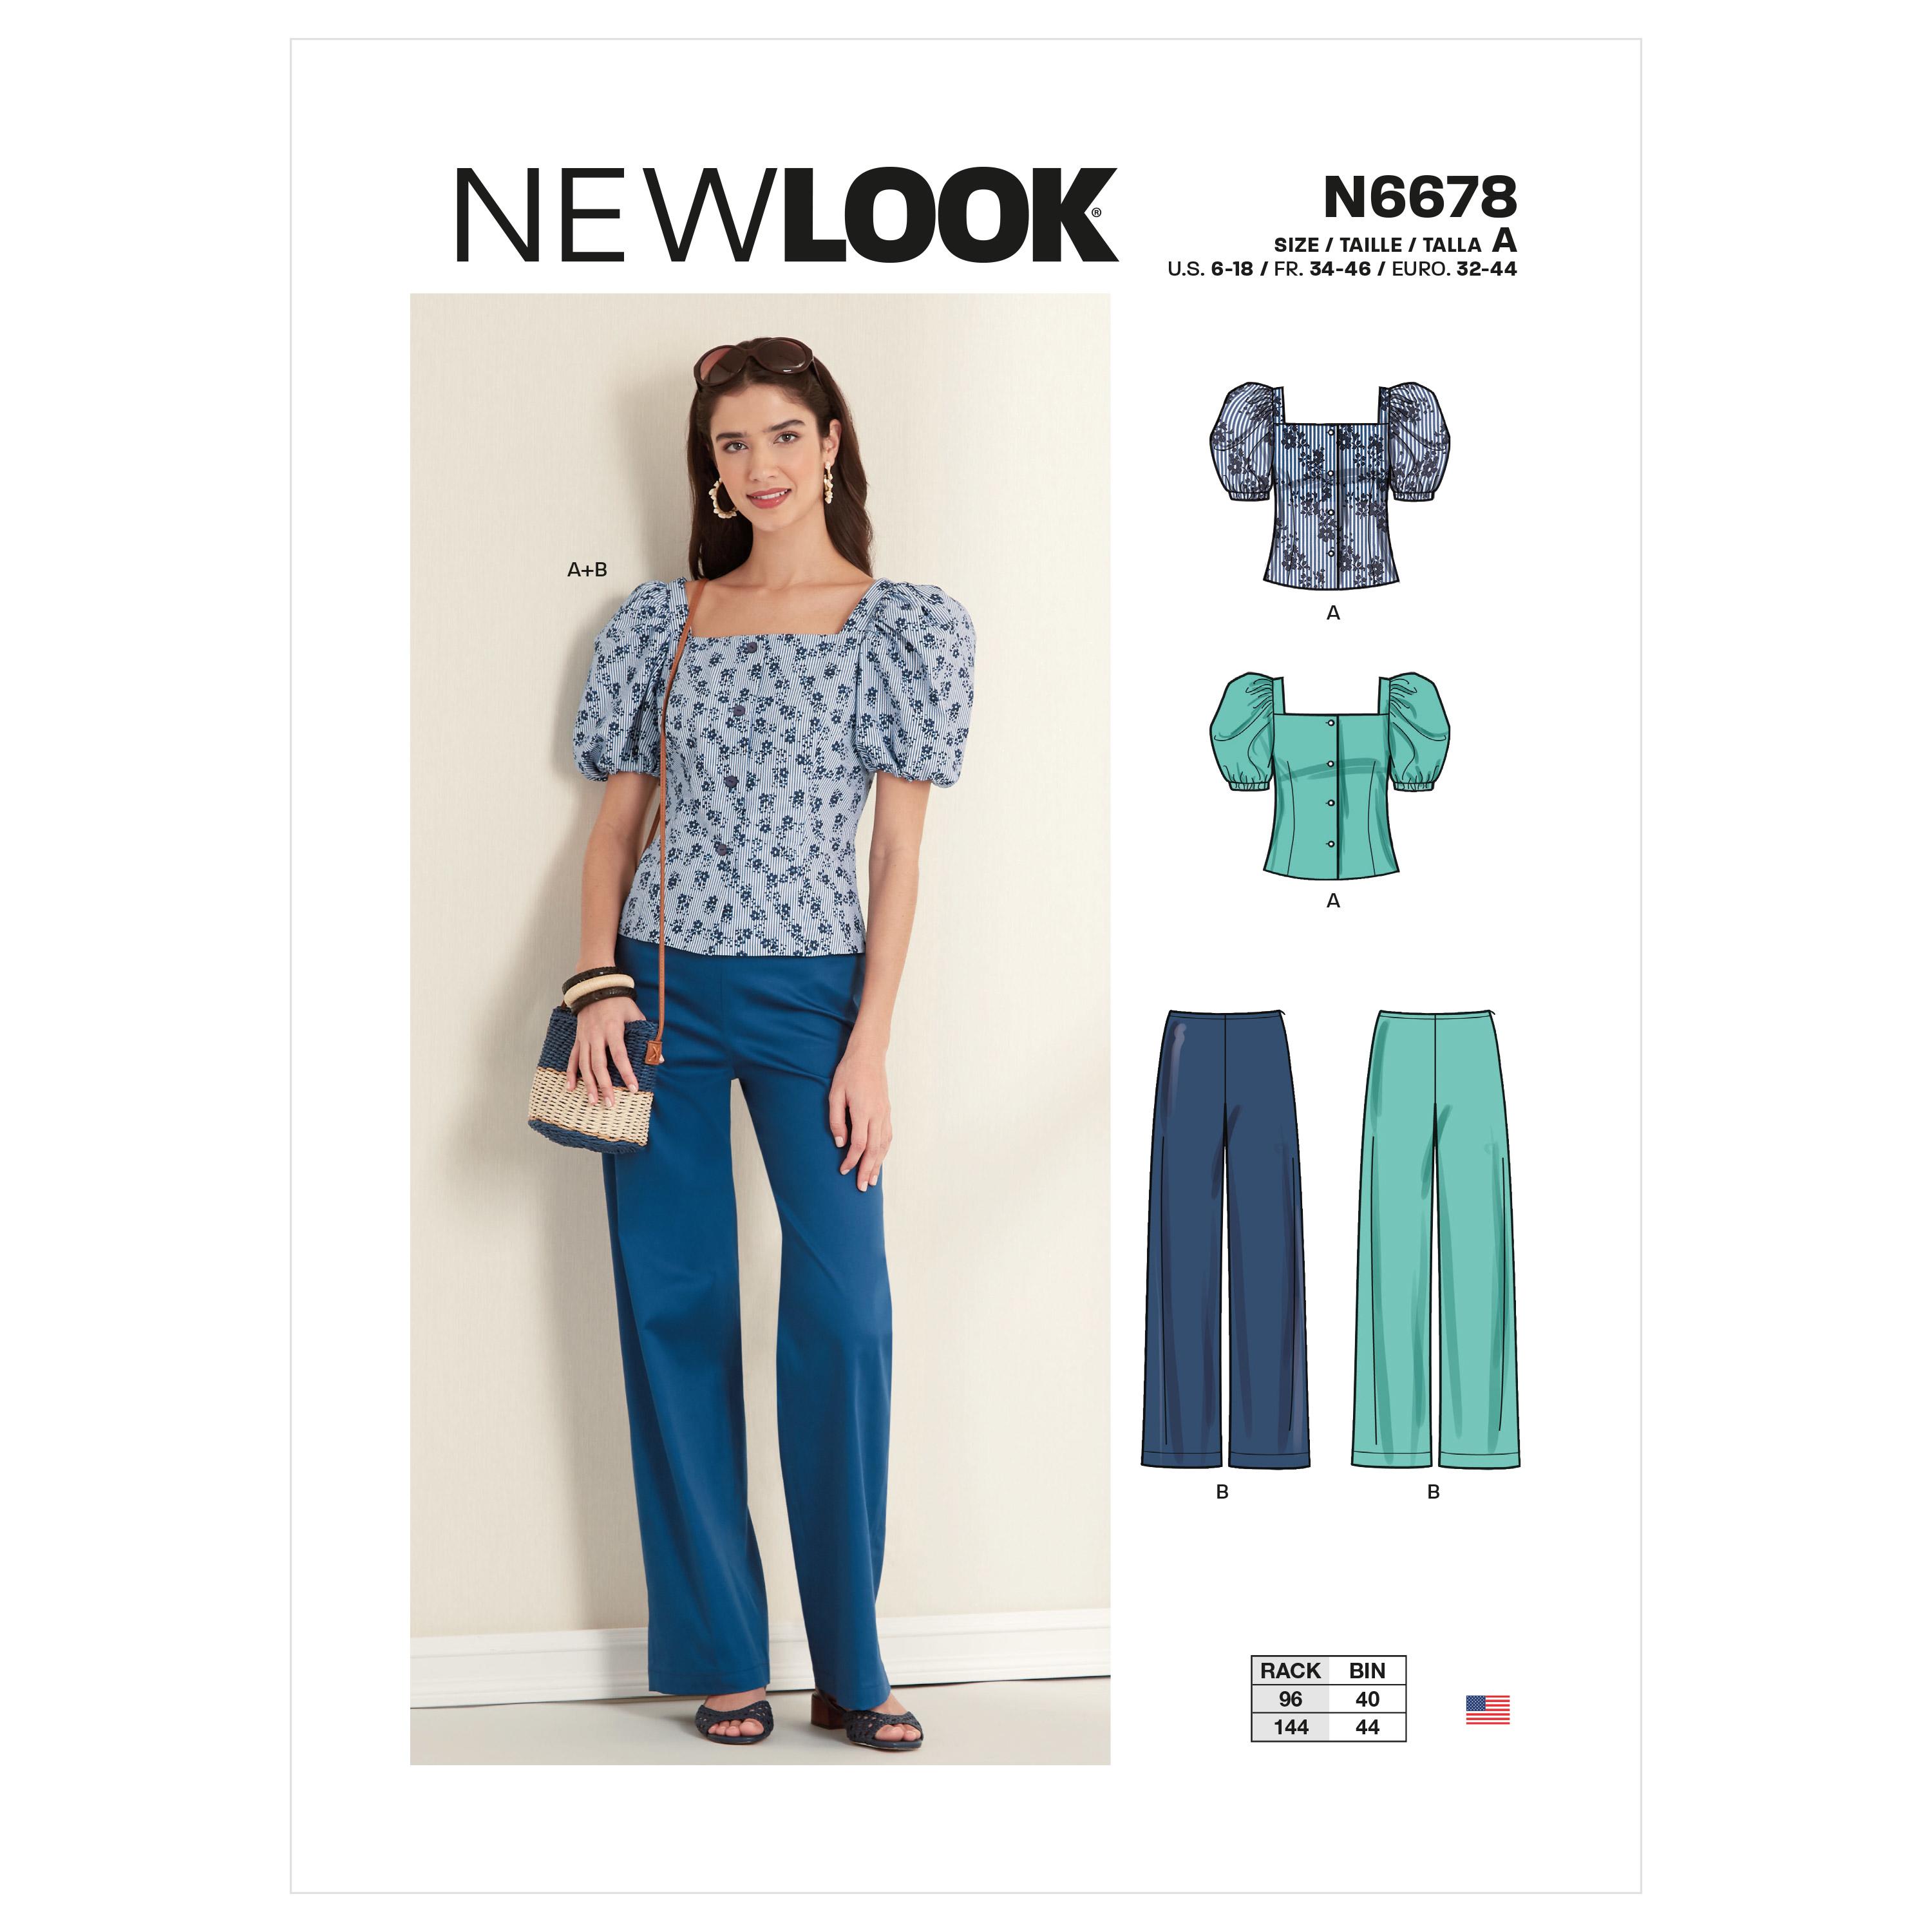 New Look Sewing Pattern N6678 Misses' Top and Trousers